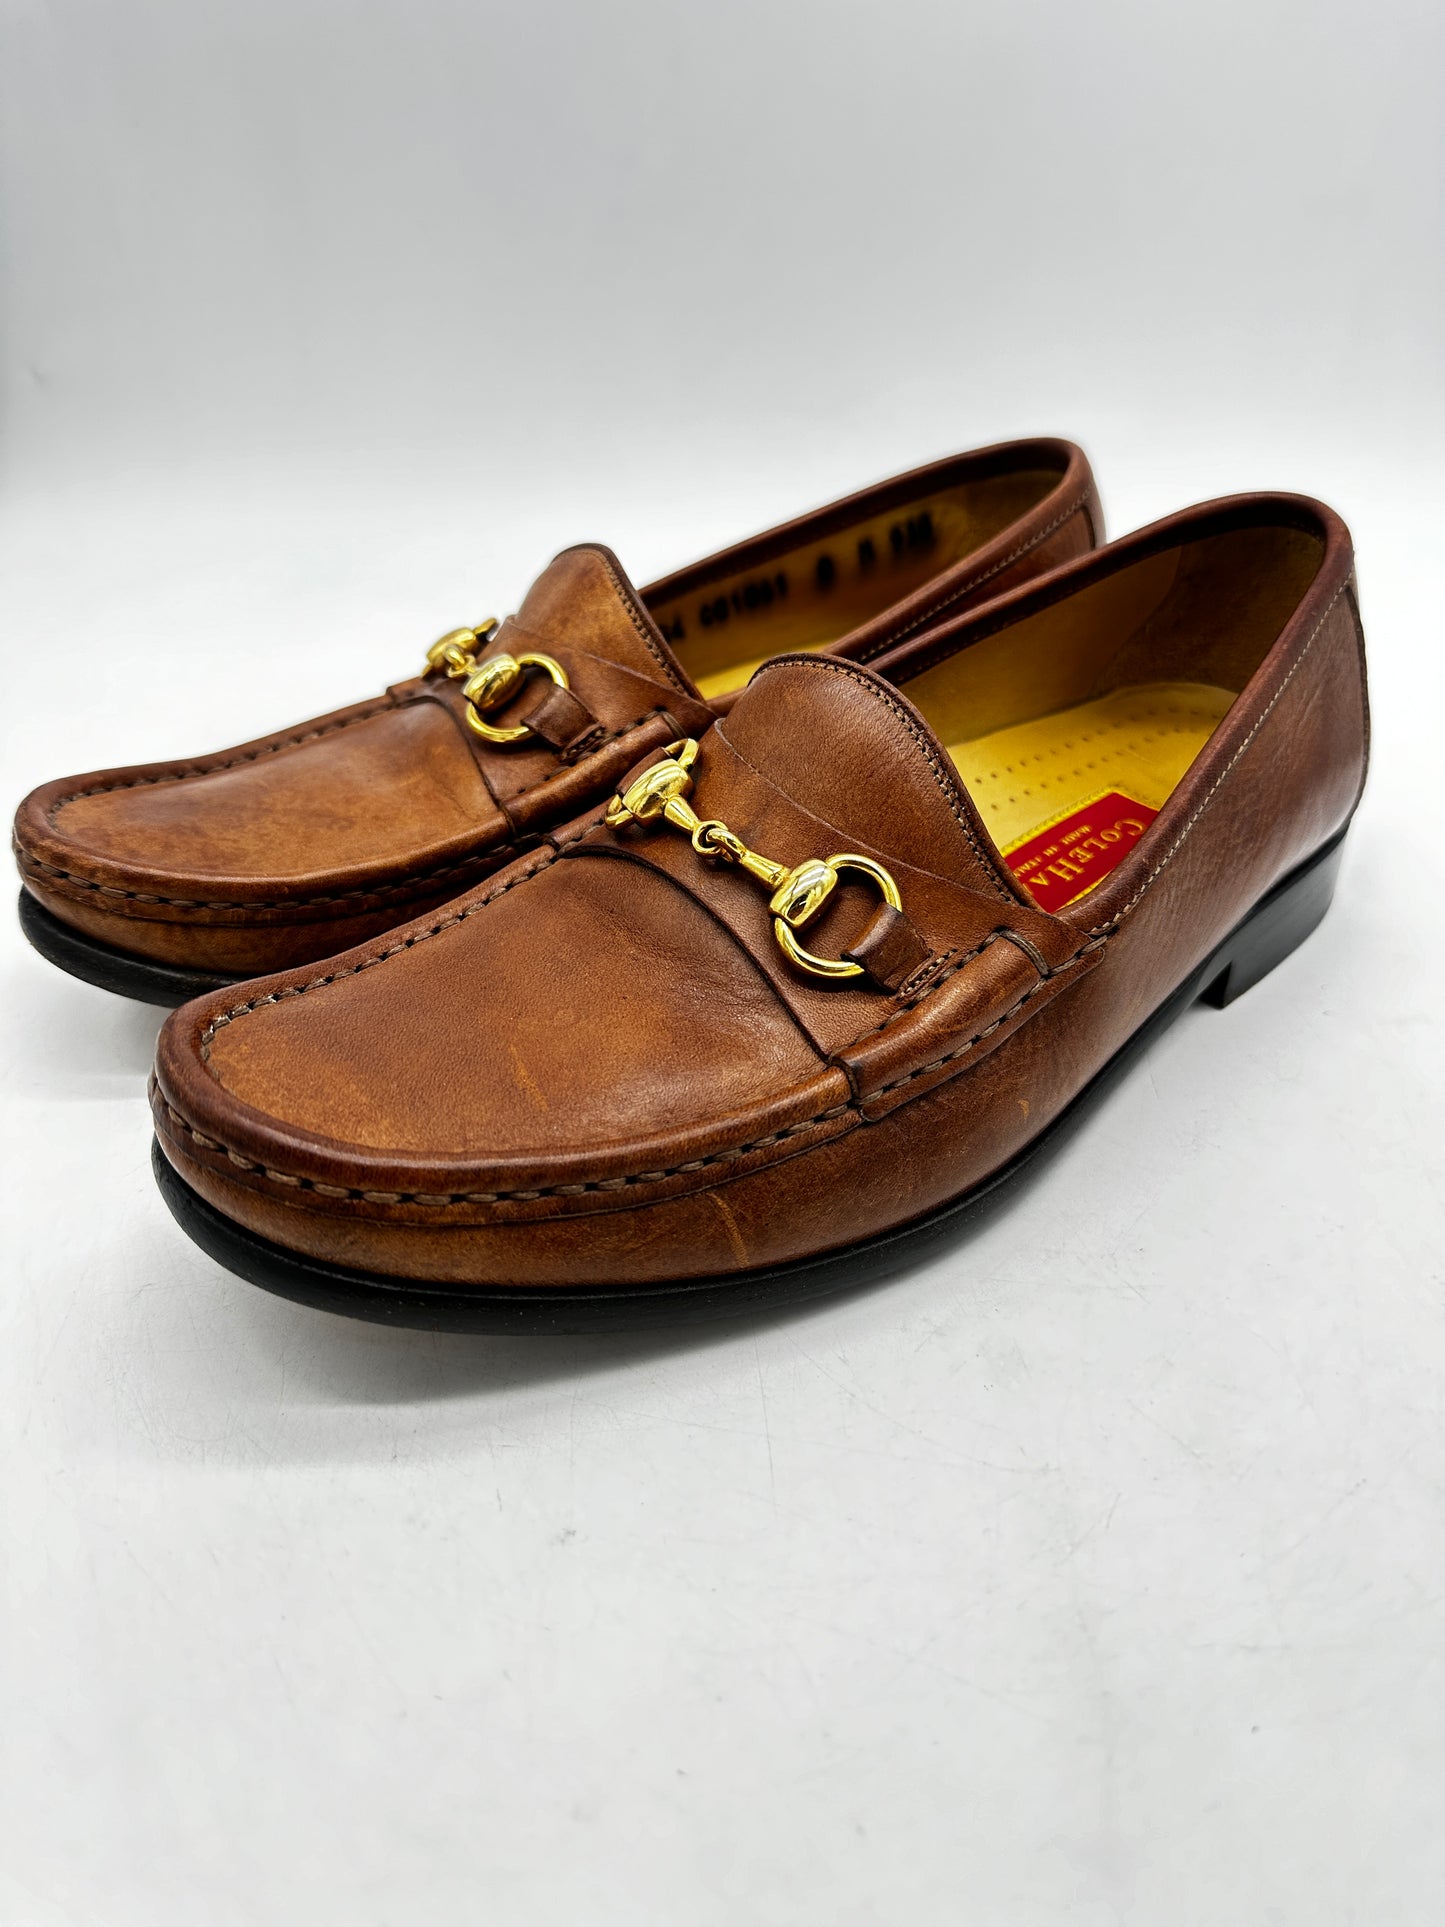 Preowned Cole Haan Chestnut Penny Loafers Sz 8M/9.5W